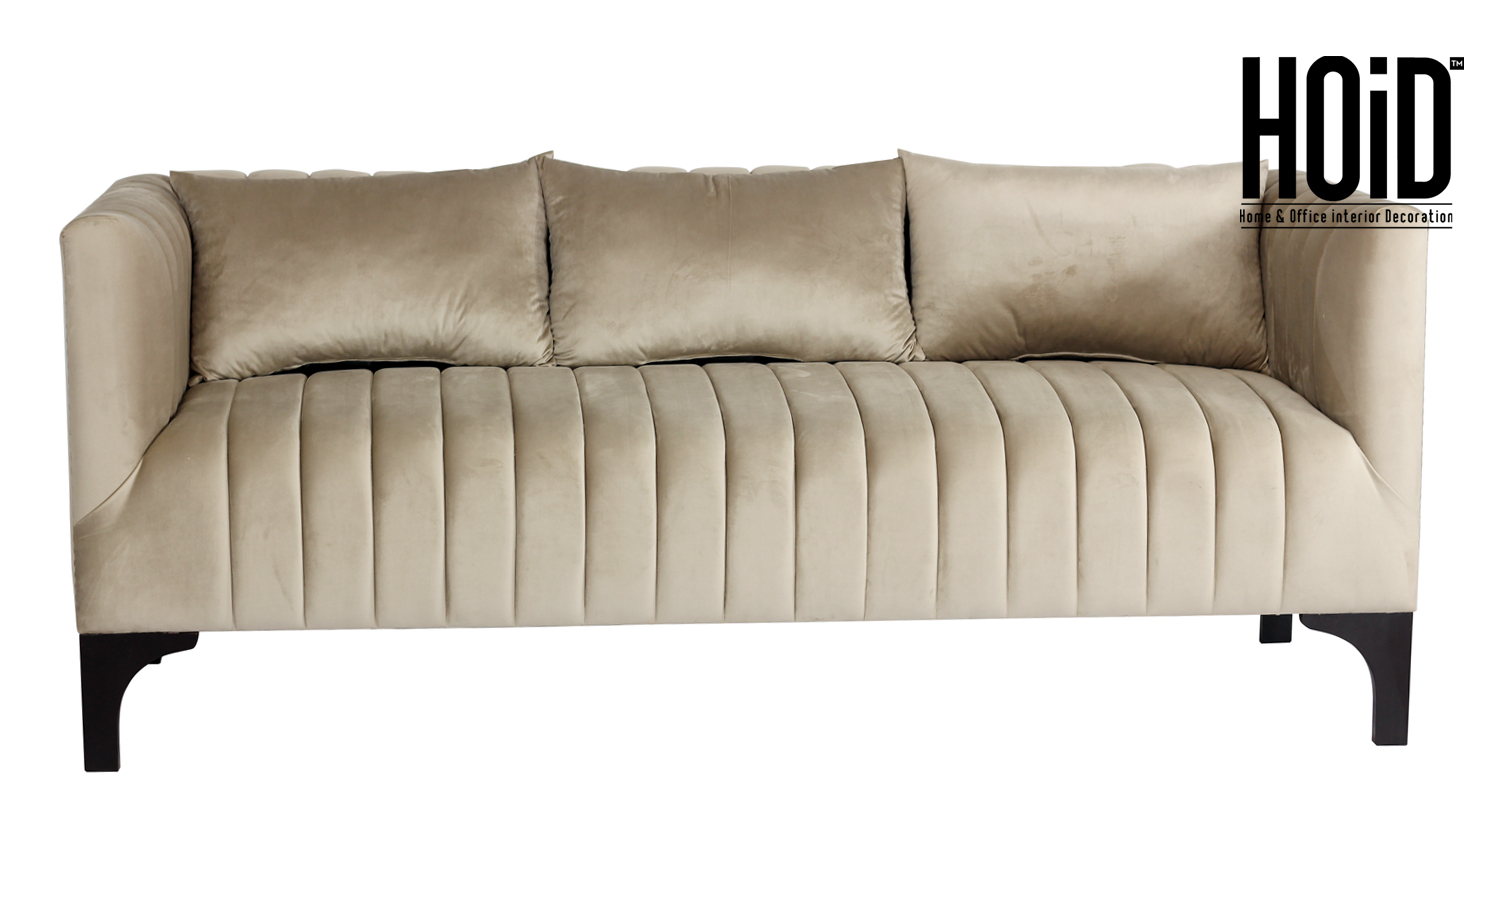 sweetouch-3-seater-sofa-02-1.jpg